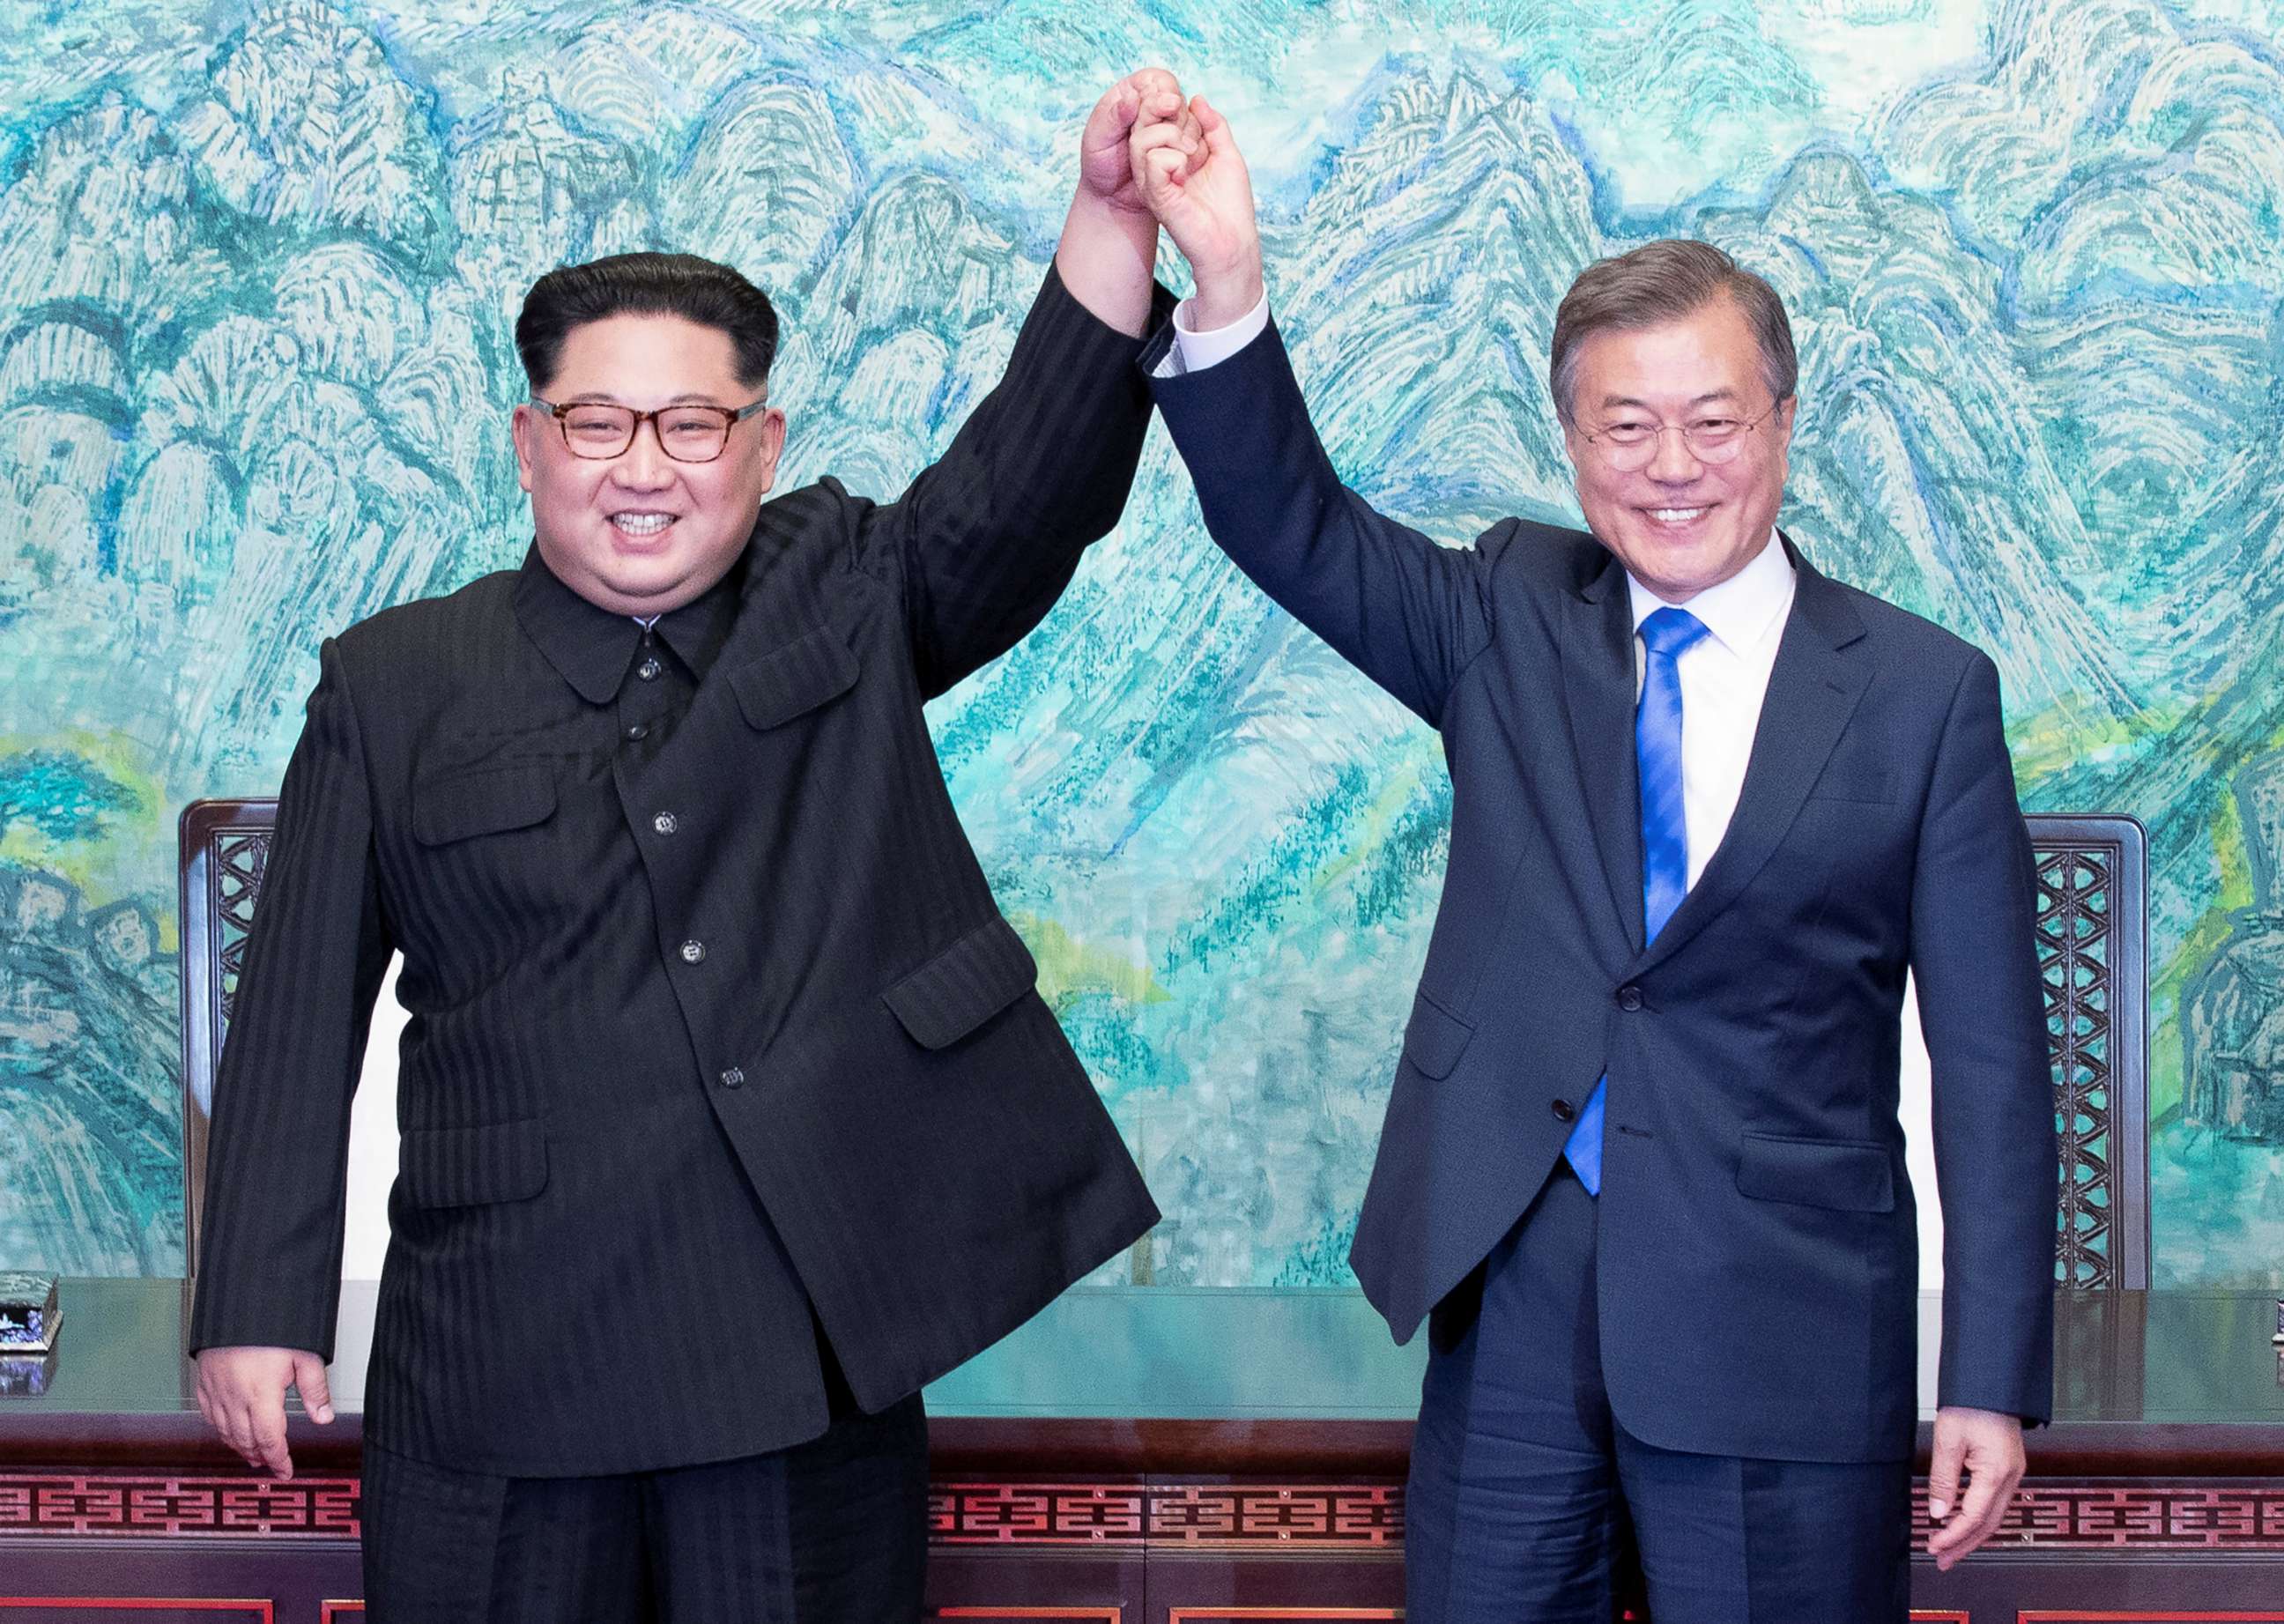 PHOTO: North Korean leader Kim Jong Un and South Korean President Moon Jae-in raise their hands at the truce village of Panmunjom inside the demilitarized zone separating the two Koreas, South Korea, April 27, 2018.